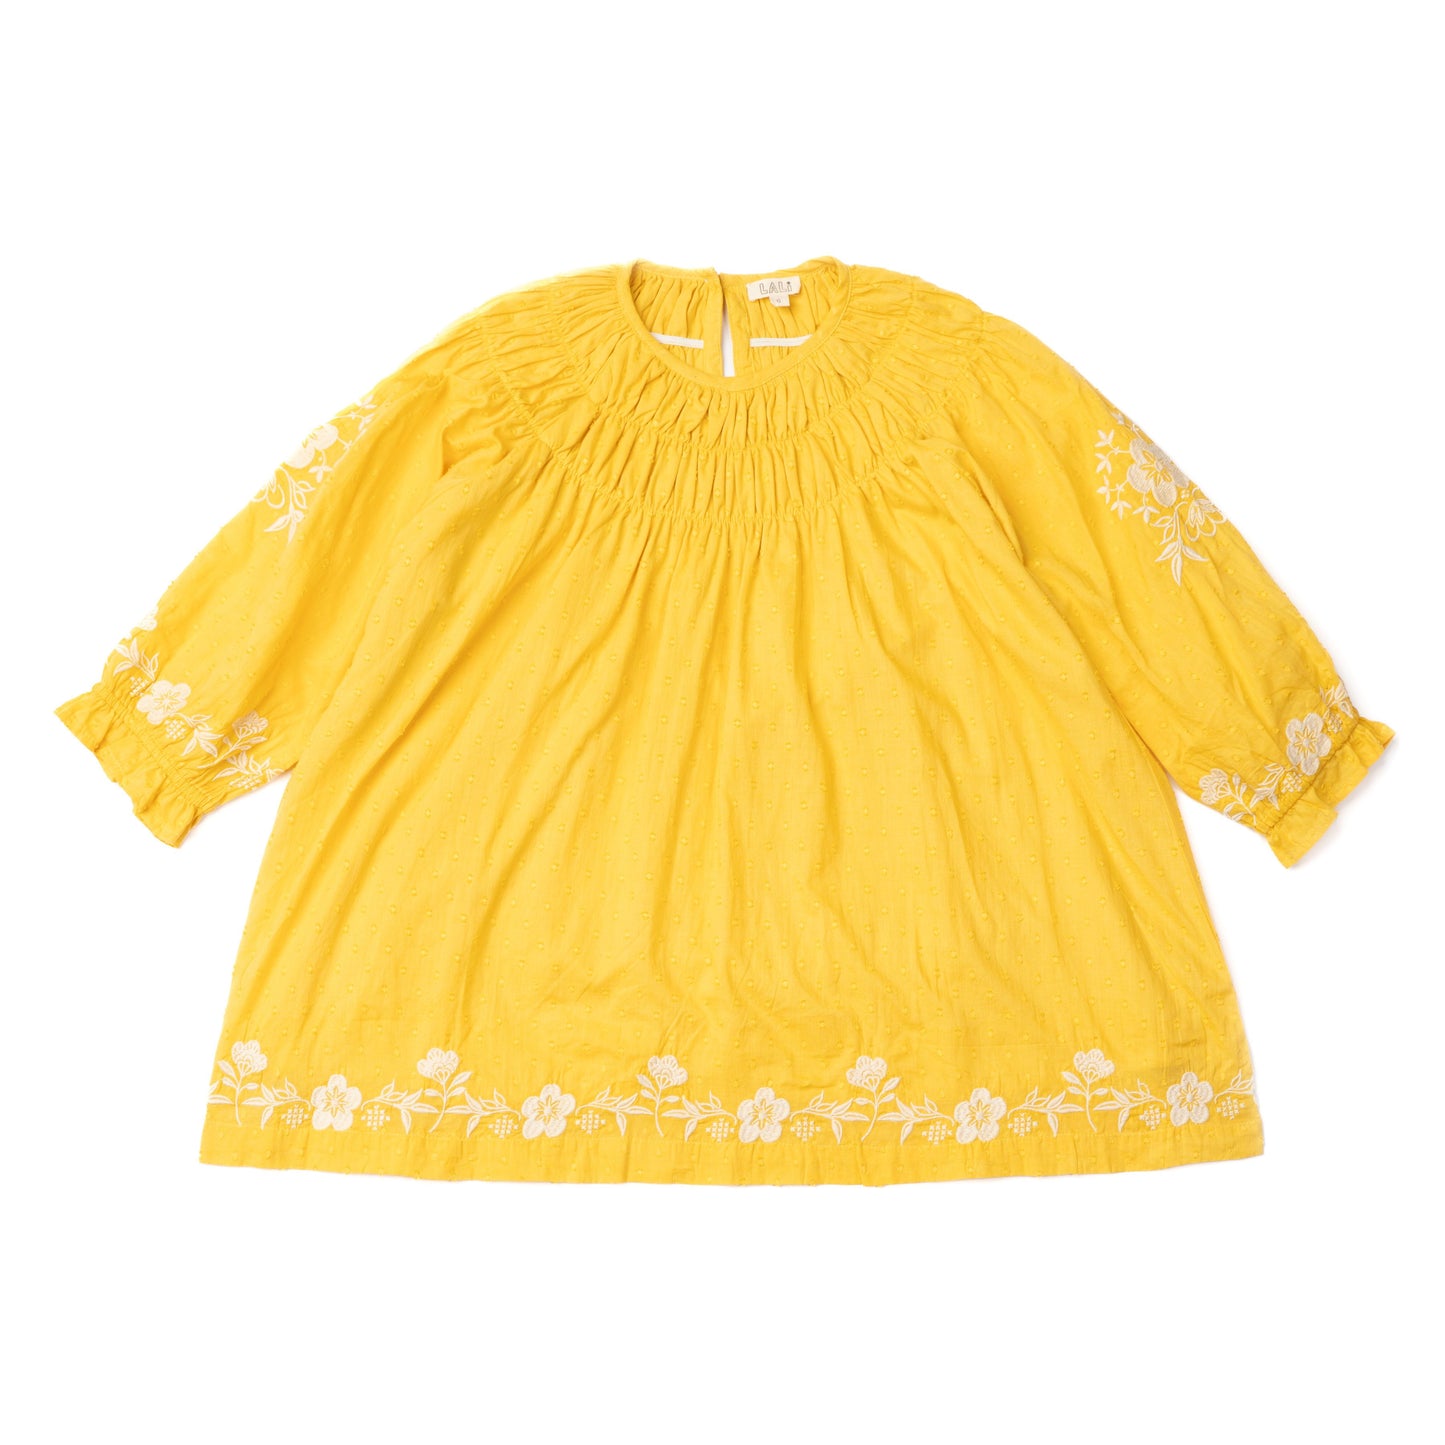 Lali Kids Tulip Dress In  Misted Yellow With Embroidery